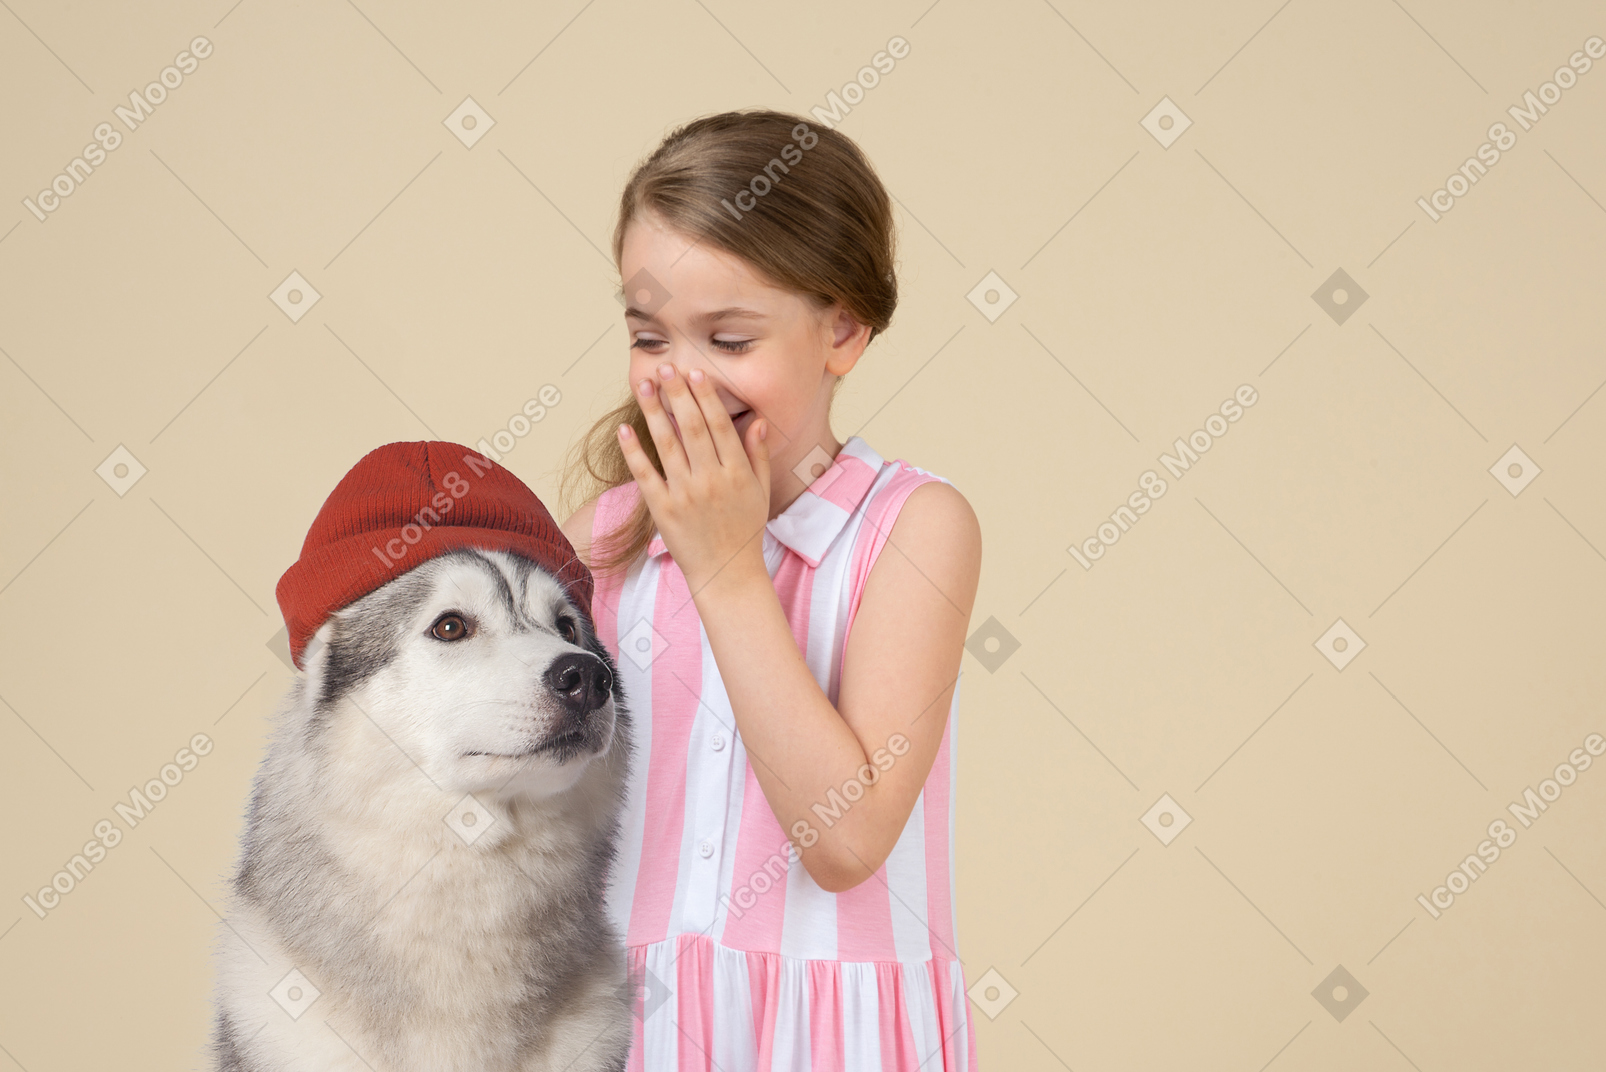 Cute little girl and a husky dog wearing a hat